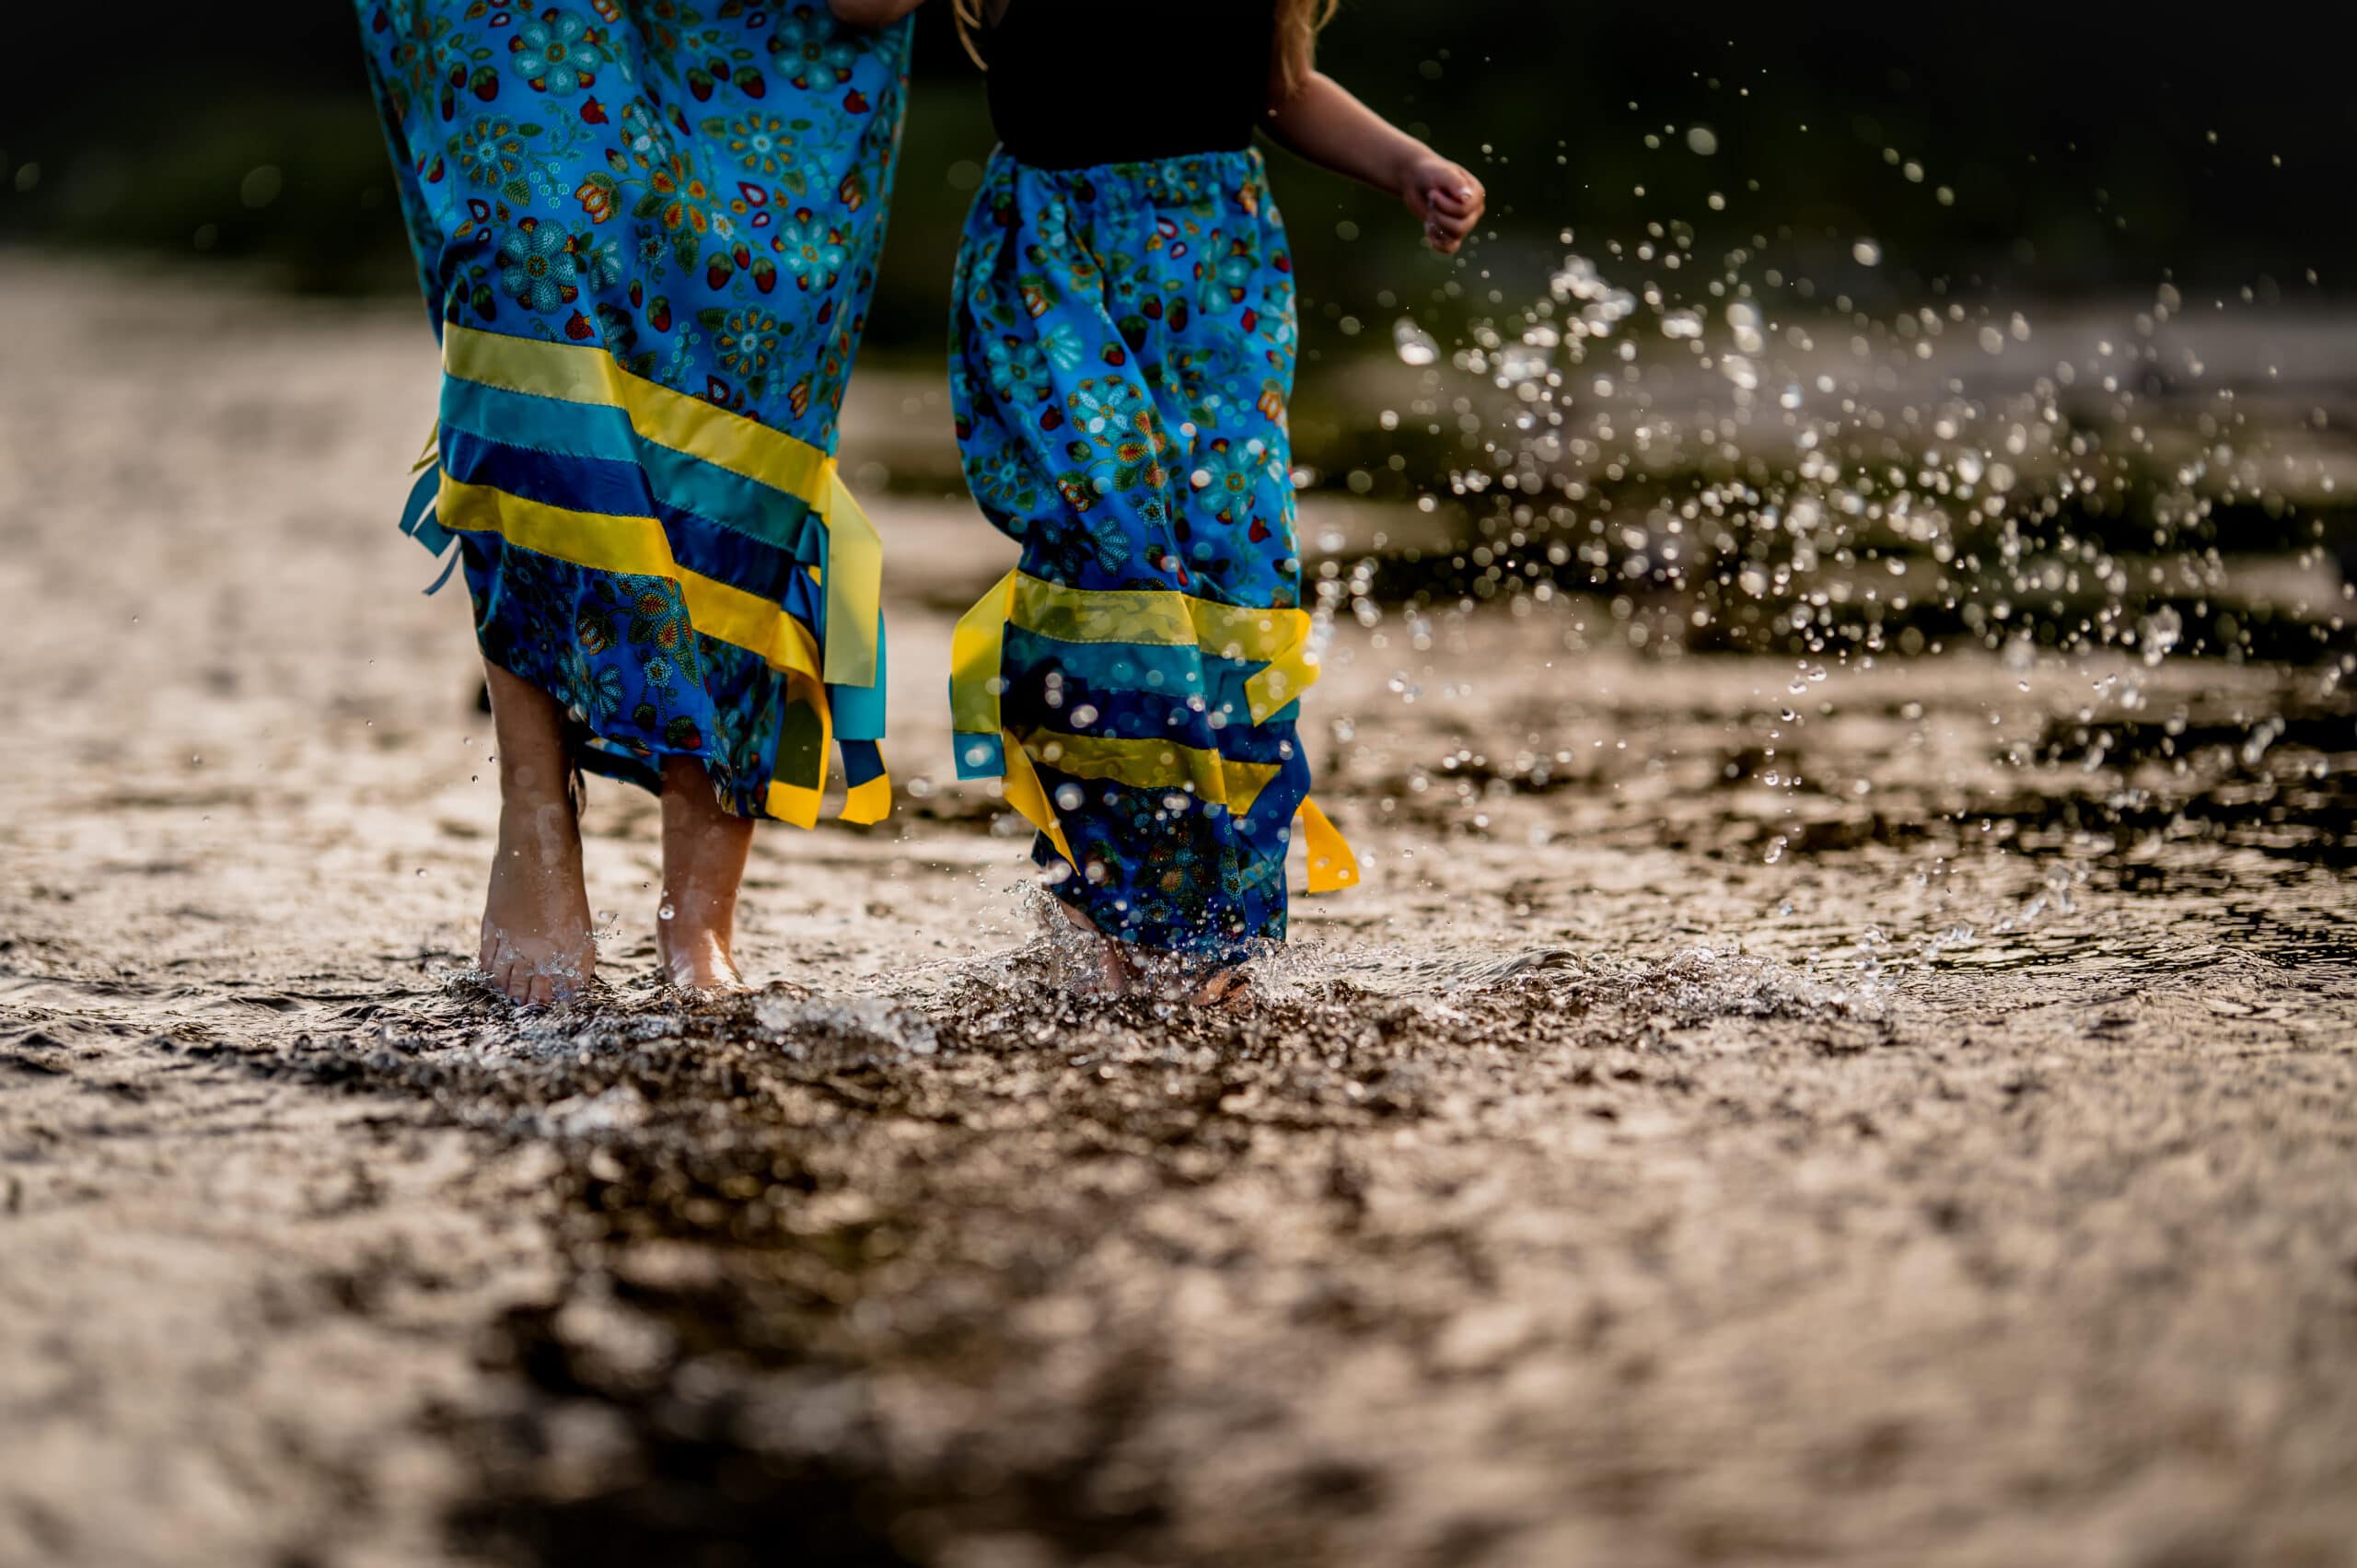 A woman and girl run through the water in matching blue ribbon skirts